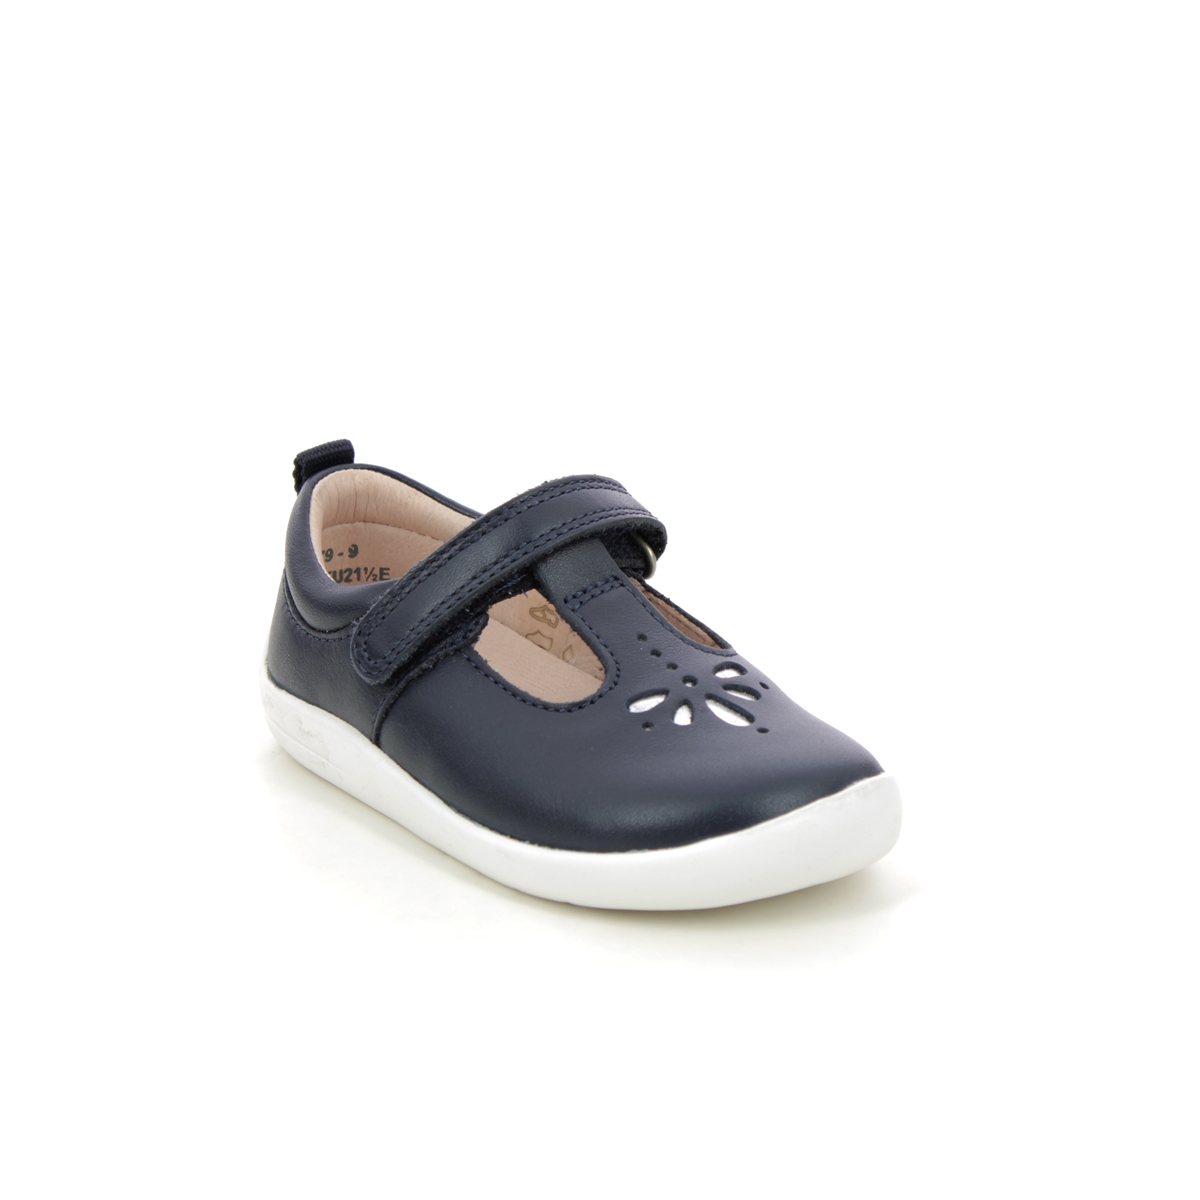 Start Rite Puzzle Navy Leather Kids first shoes 0779-95E in a Plain Leather in Size 7